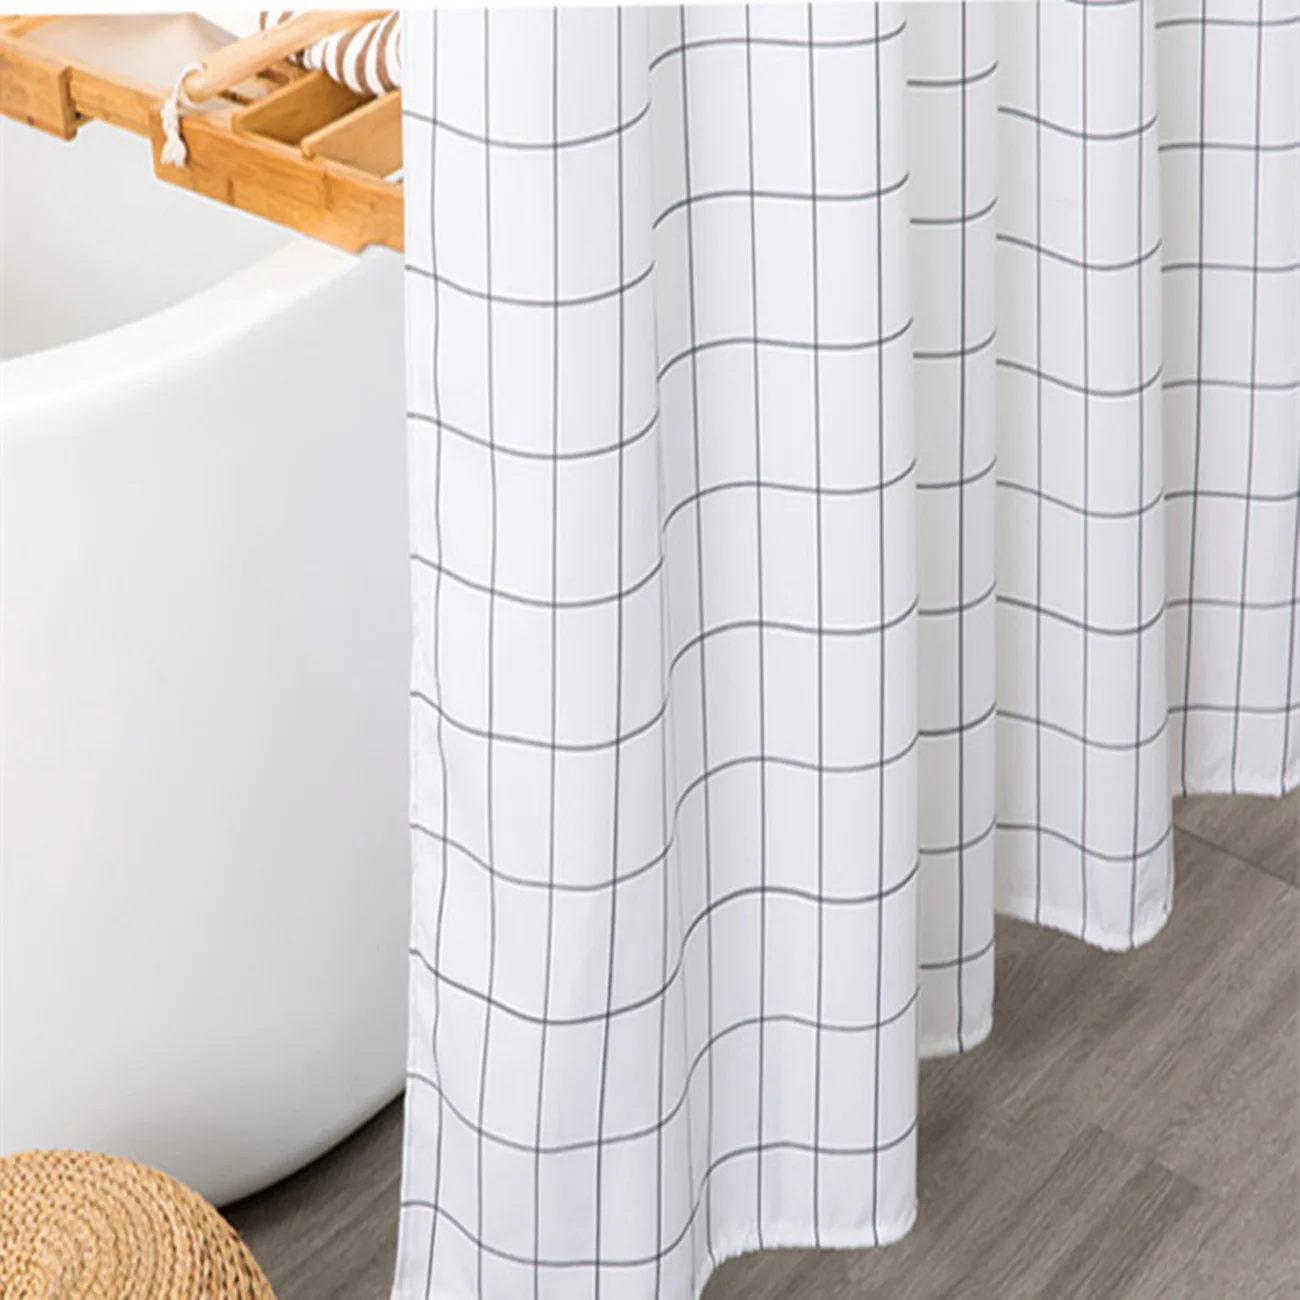 Amazon Basics Shower Curtain with Hooks 72 x 72 Inch White with black check bathroom curtains set